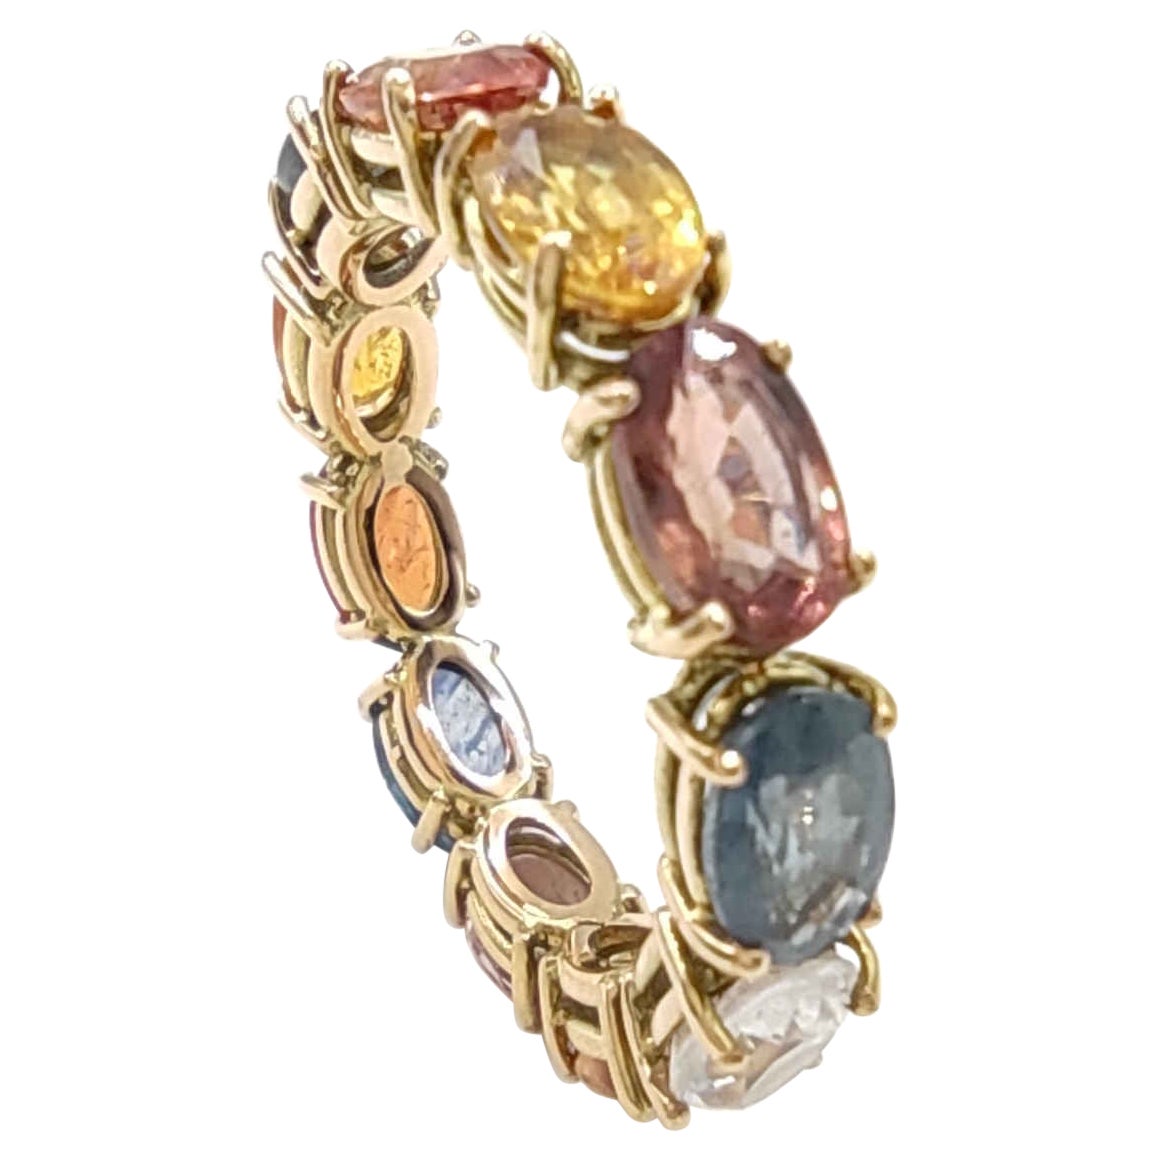 Unique 14kt Yellow Gold Ring with Handcrafted Design & Sapphires - Shop Now For Sale